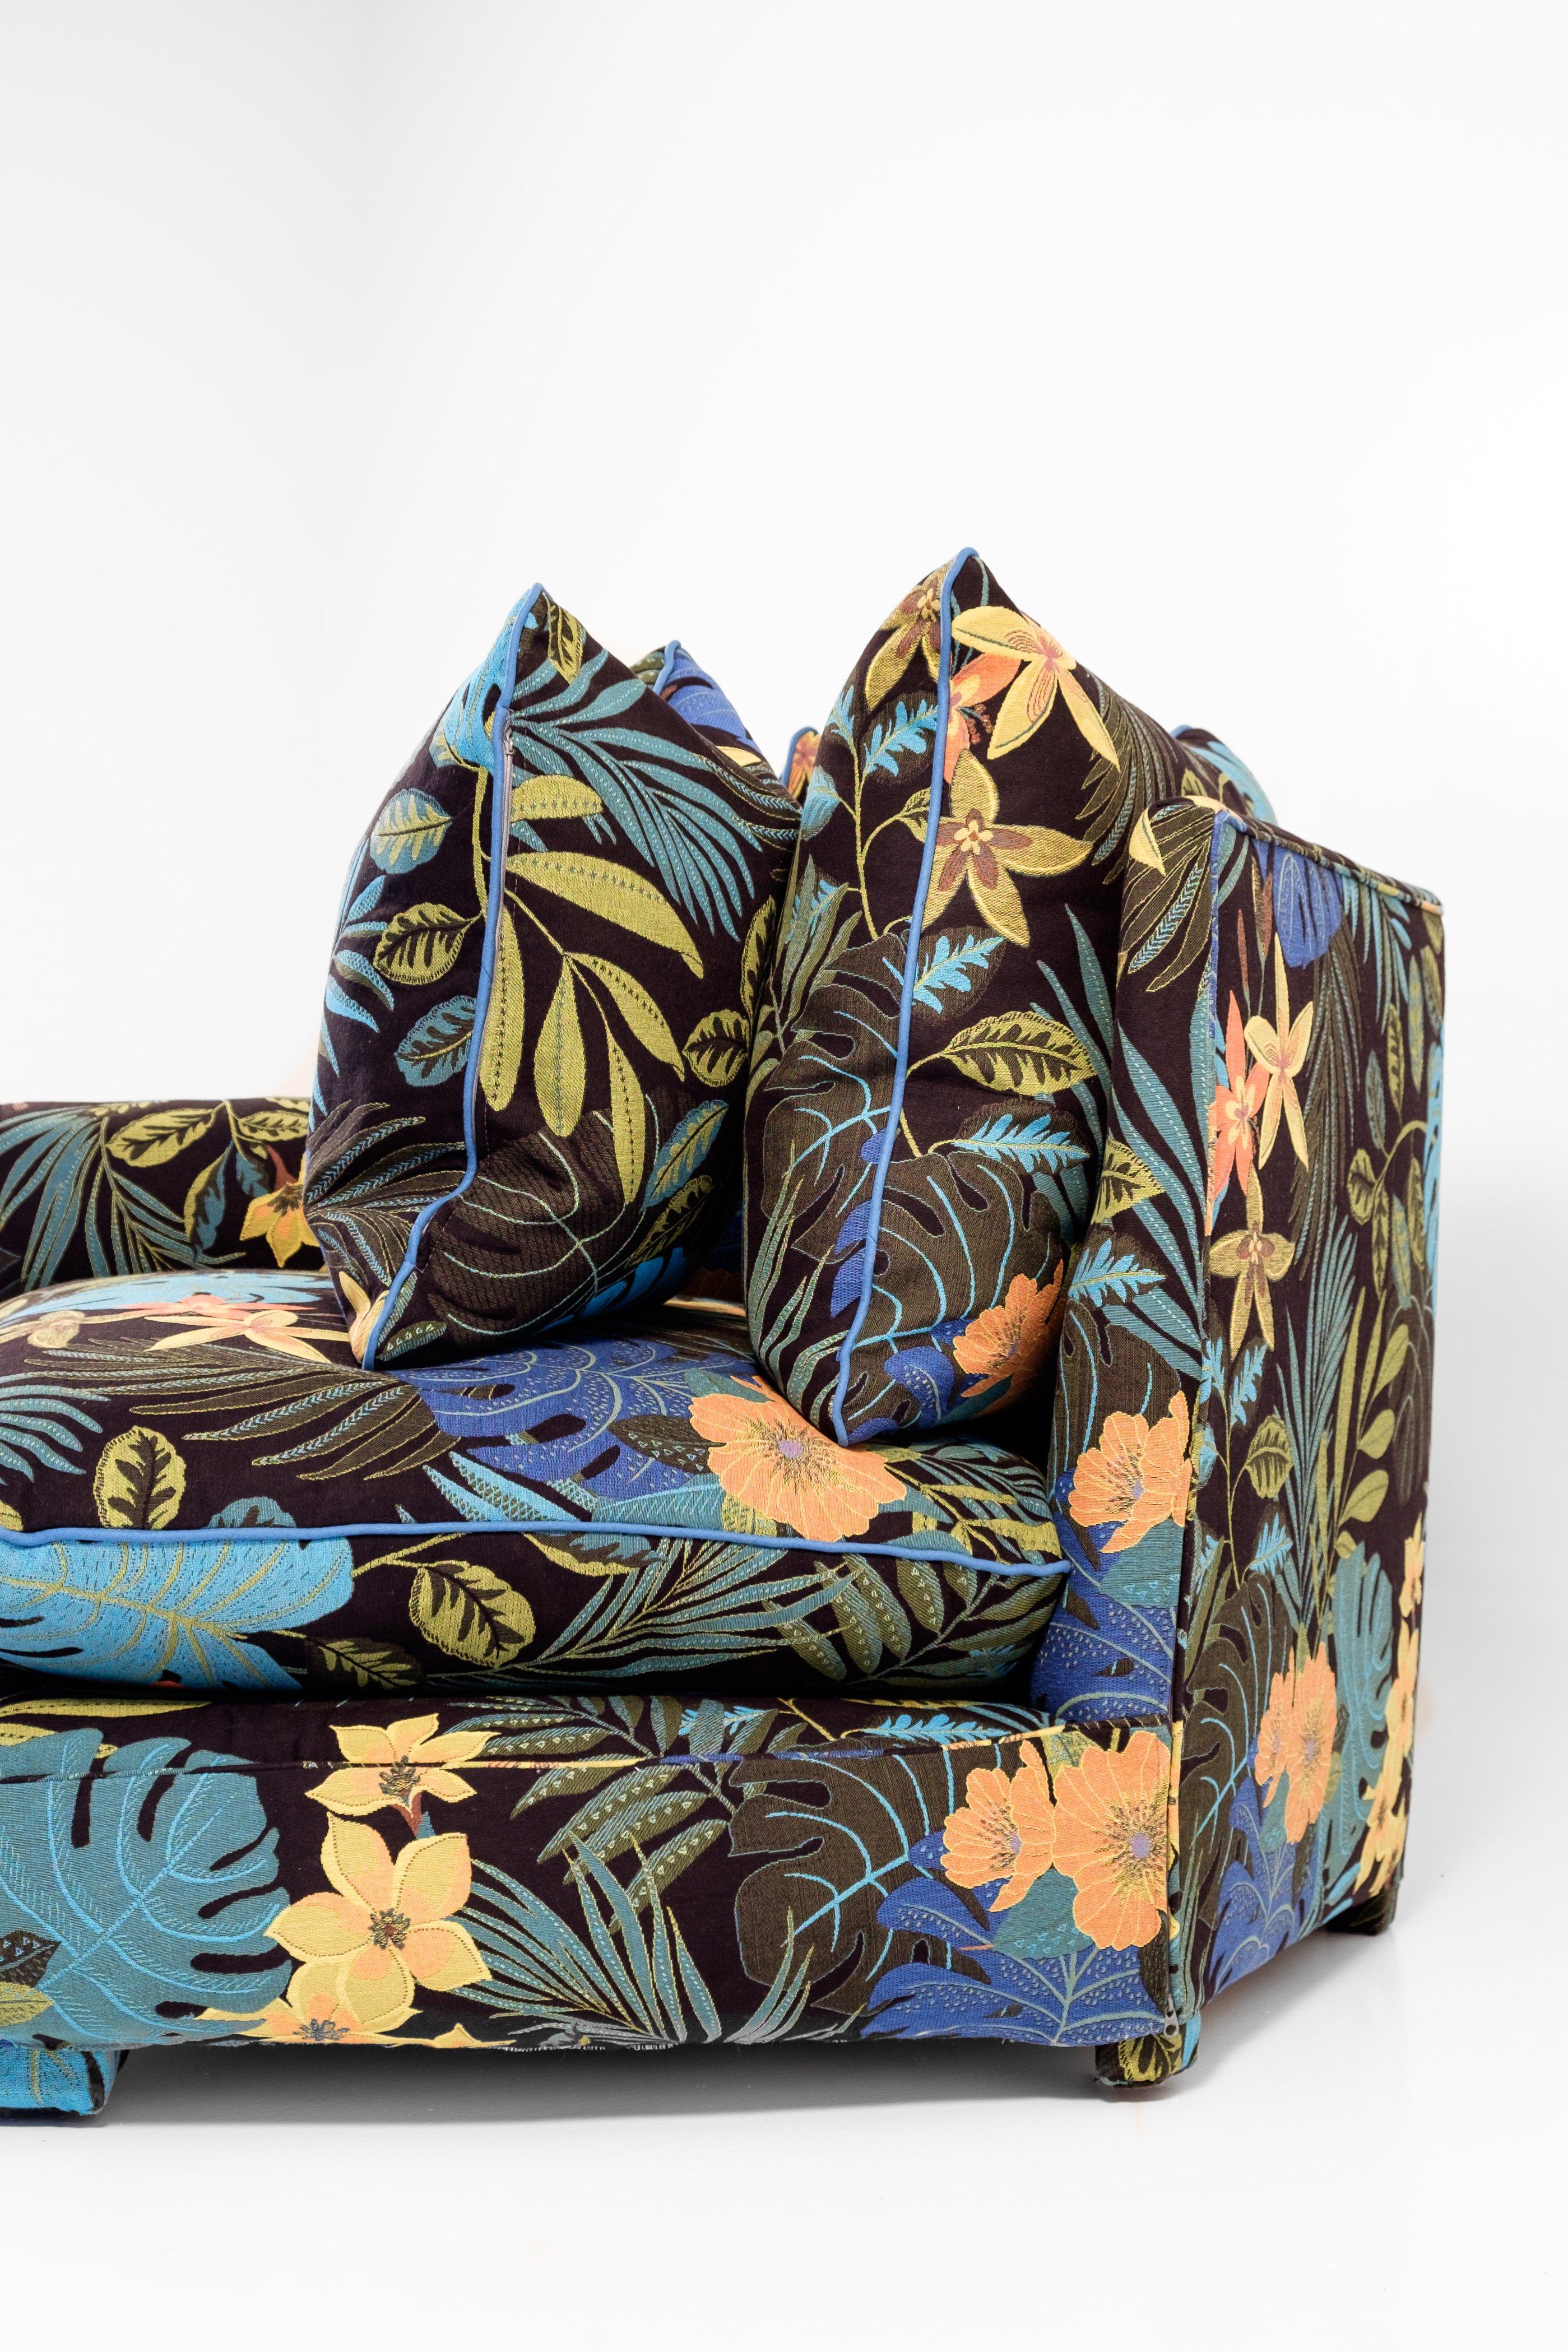 Contemporary JPDemeyer Home Collection Grand Sofa Cha-Cha in Jungle by Night Fabric For Sale